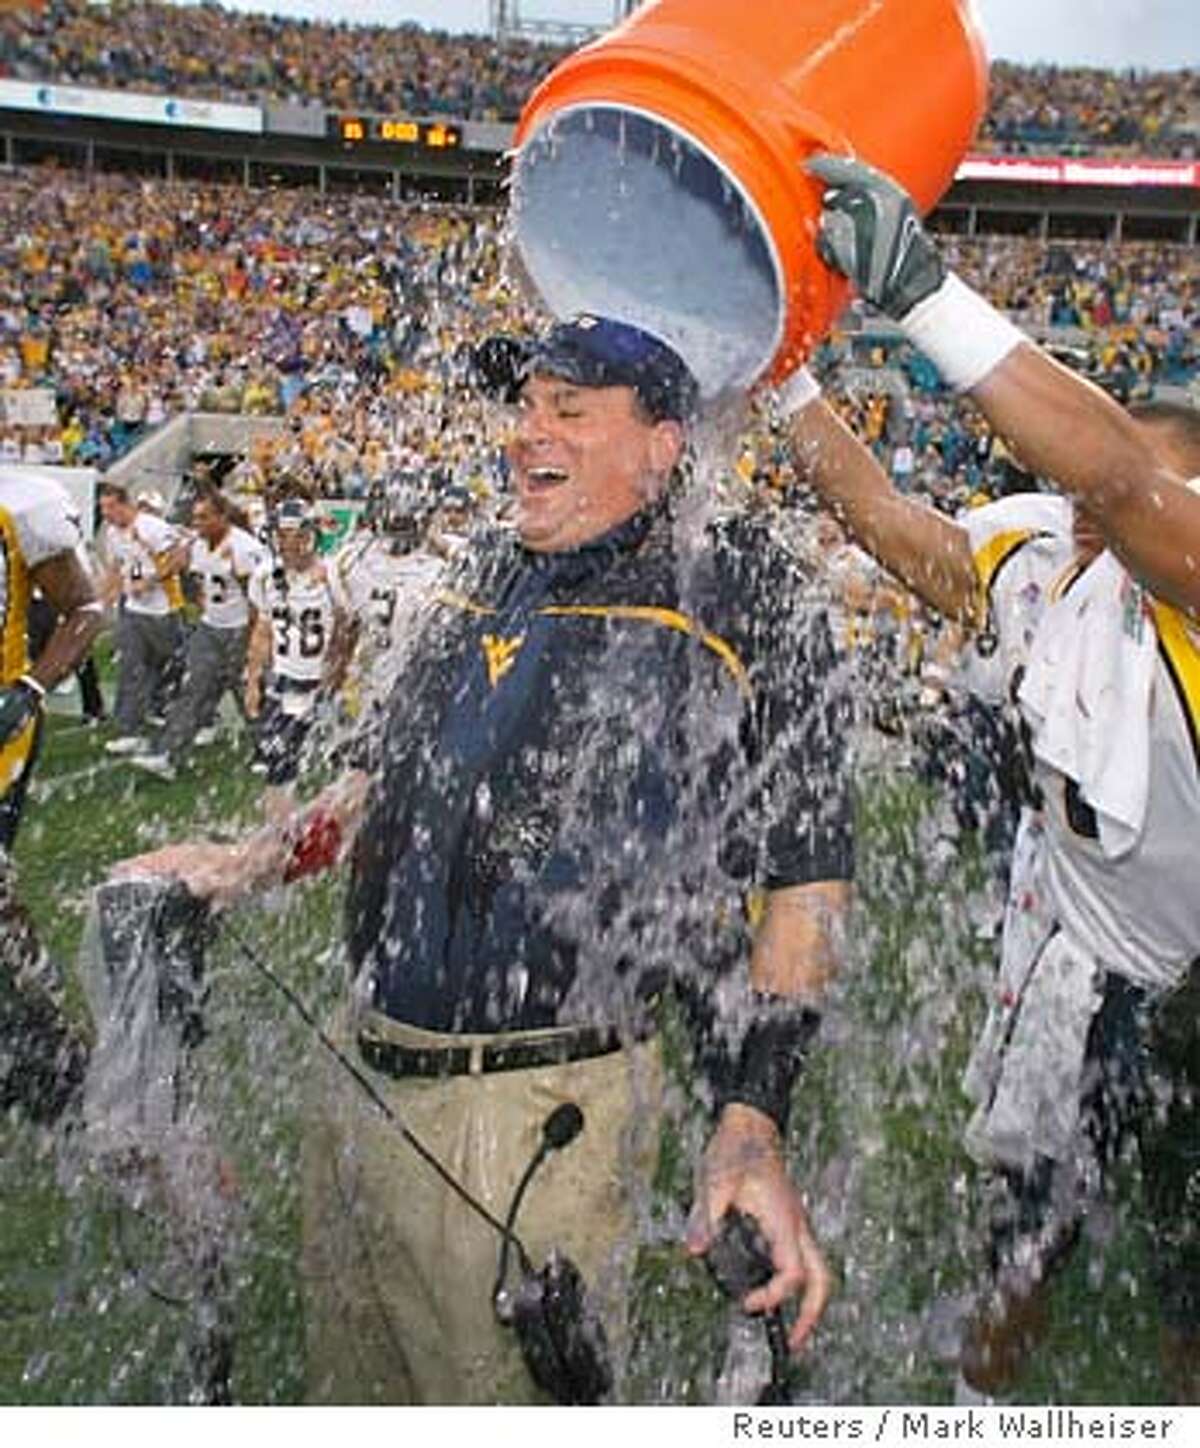 West Virginia tailback Steve Slaton (R) dunks ice water on Mountineer head coach Rich Rodriguez after he led his team to a 38-35 victory over the Georgia Tech Yellow Jackets in the Gator Bowl game at Alltel Stadium in Jacksonville, Florida January 1, 2007. REUTERS/Mark Wallheiser (UNITED STATES)